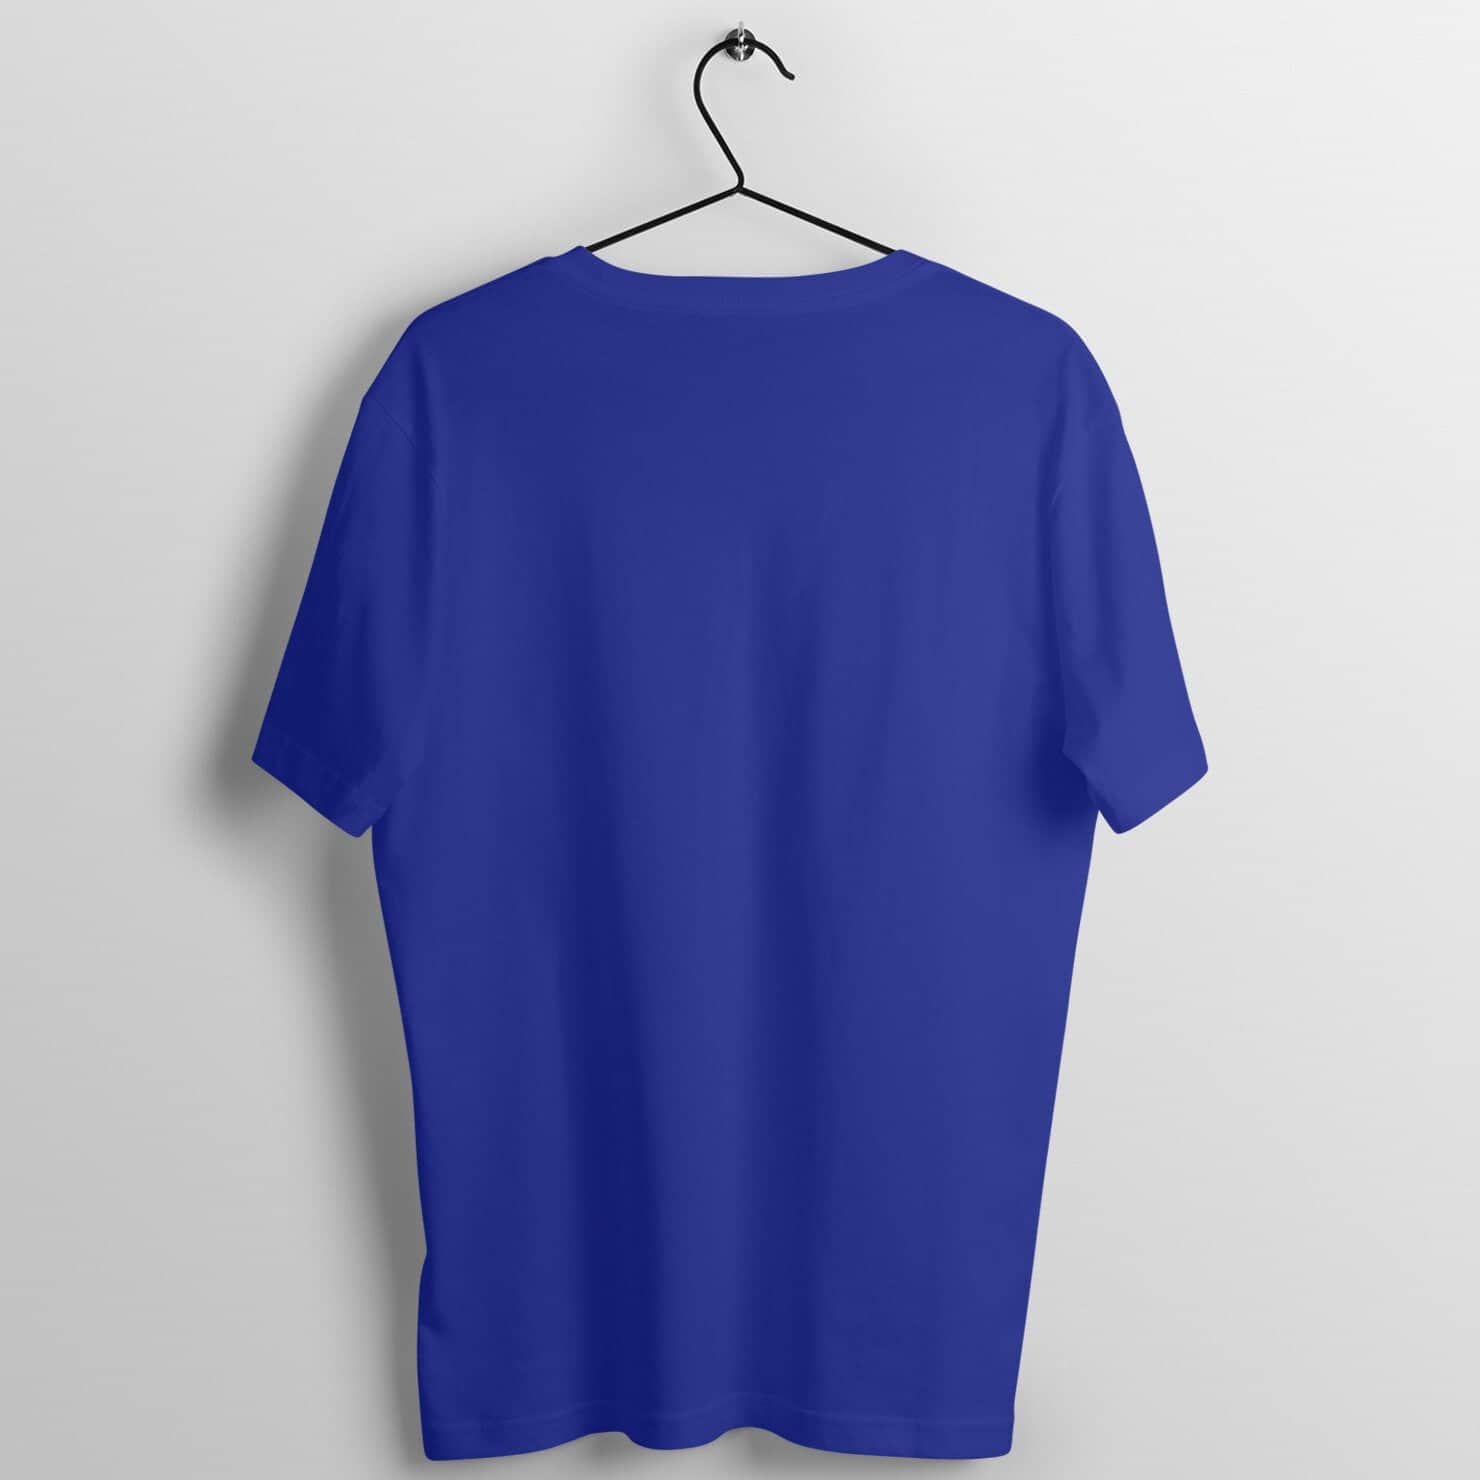 Waiting for the Weekend Like Funny Royal Blue T Shirt for Men and Women Printrove 